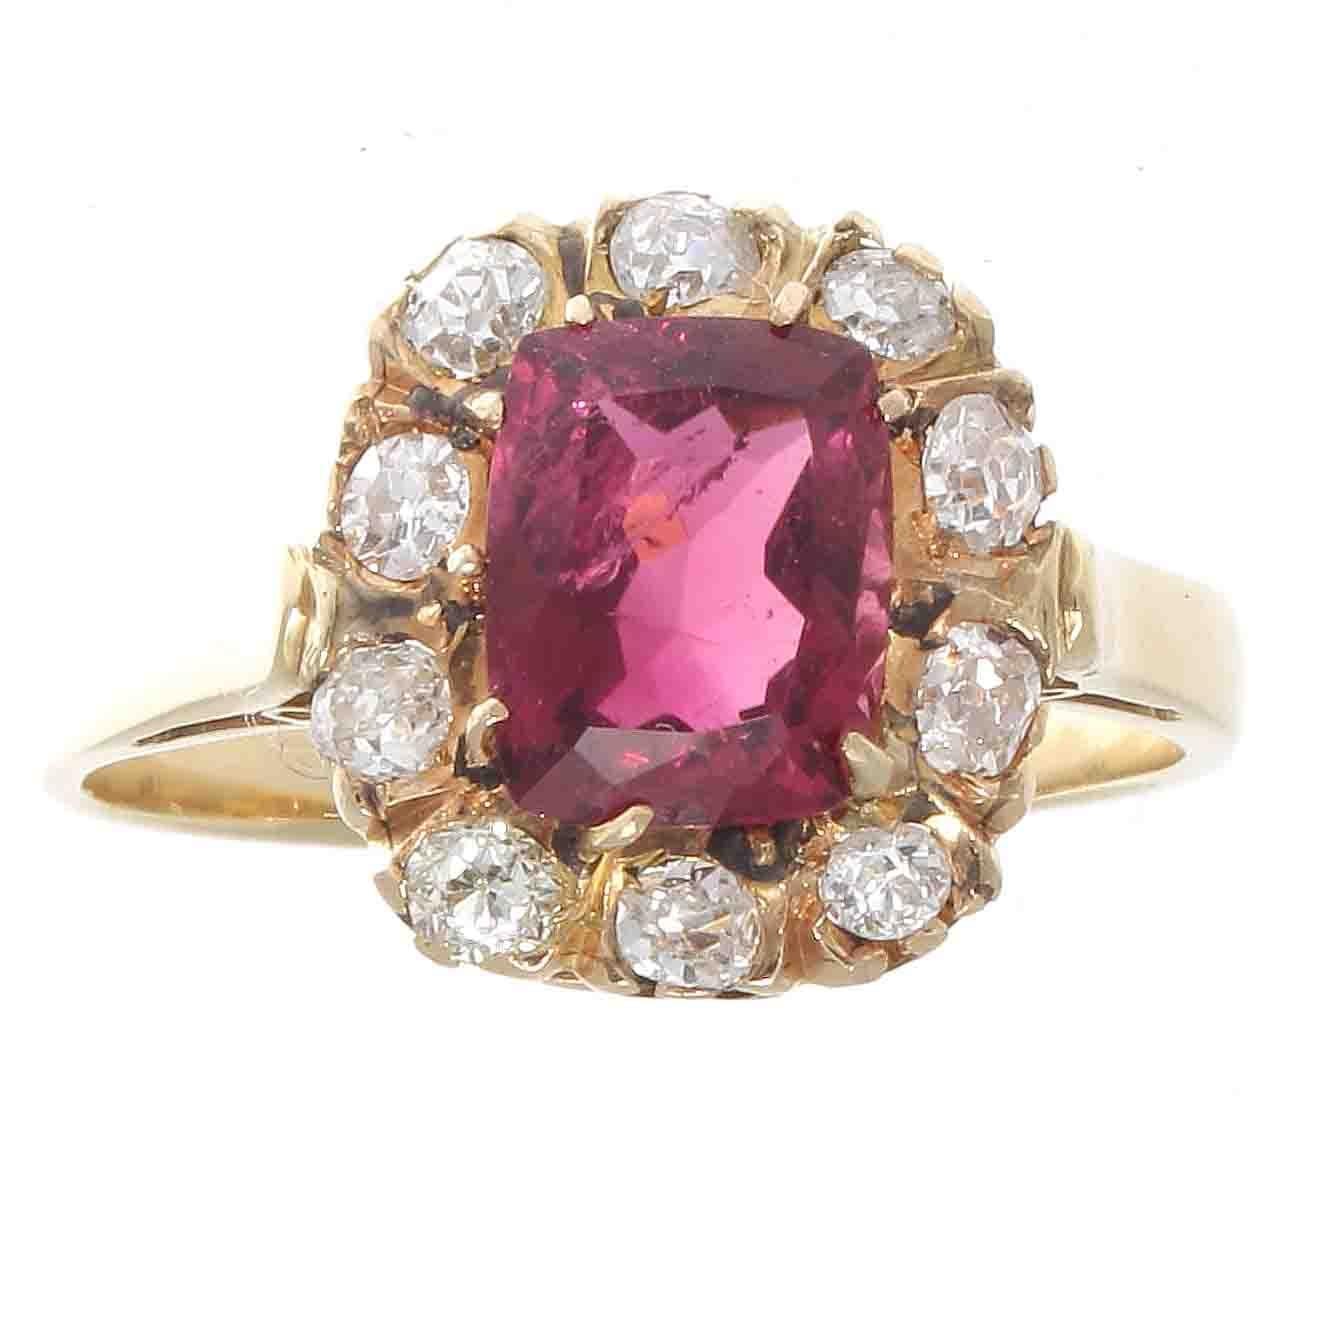 Radiating design that is filled with passion like a new found love. Designs from the 19th century with vibrant colors were part of the romantic period to mimic the love Queen Victoria had for the King. Featuring an approximately 1.50 carat lively